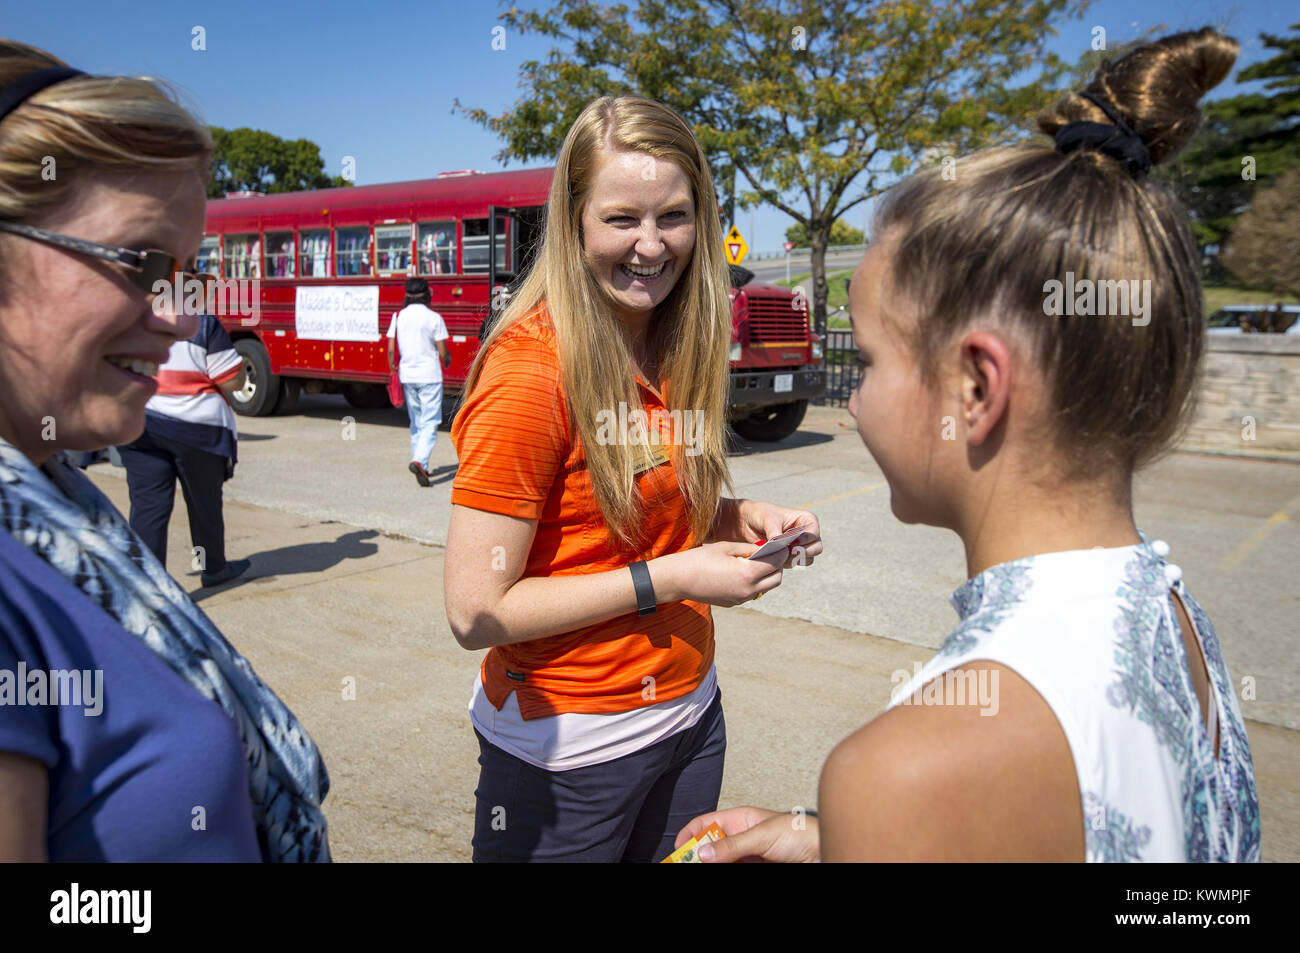 Rock Island, Iowa, USA. 13th Sep, 2017. Employee Katherine Woody hands out ten dollar bills which were given to 50 guests encouraging them to go out and do a random act of kindness for the day at the Royal Neighbors of America Home Office parking lot in Rock Island on Wednesday, September 13, 2017. Kelly Cook of Rock Island and her daughter Madison, 12, were presented with a $10,000 check for the renovation of a donated bus and $5,000 to get them started to cover operating costs. The mother-daughter duo has been collecting donated clothes to give to young kids in need and was previously Stock Photo